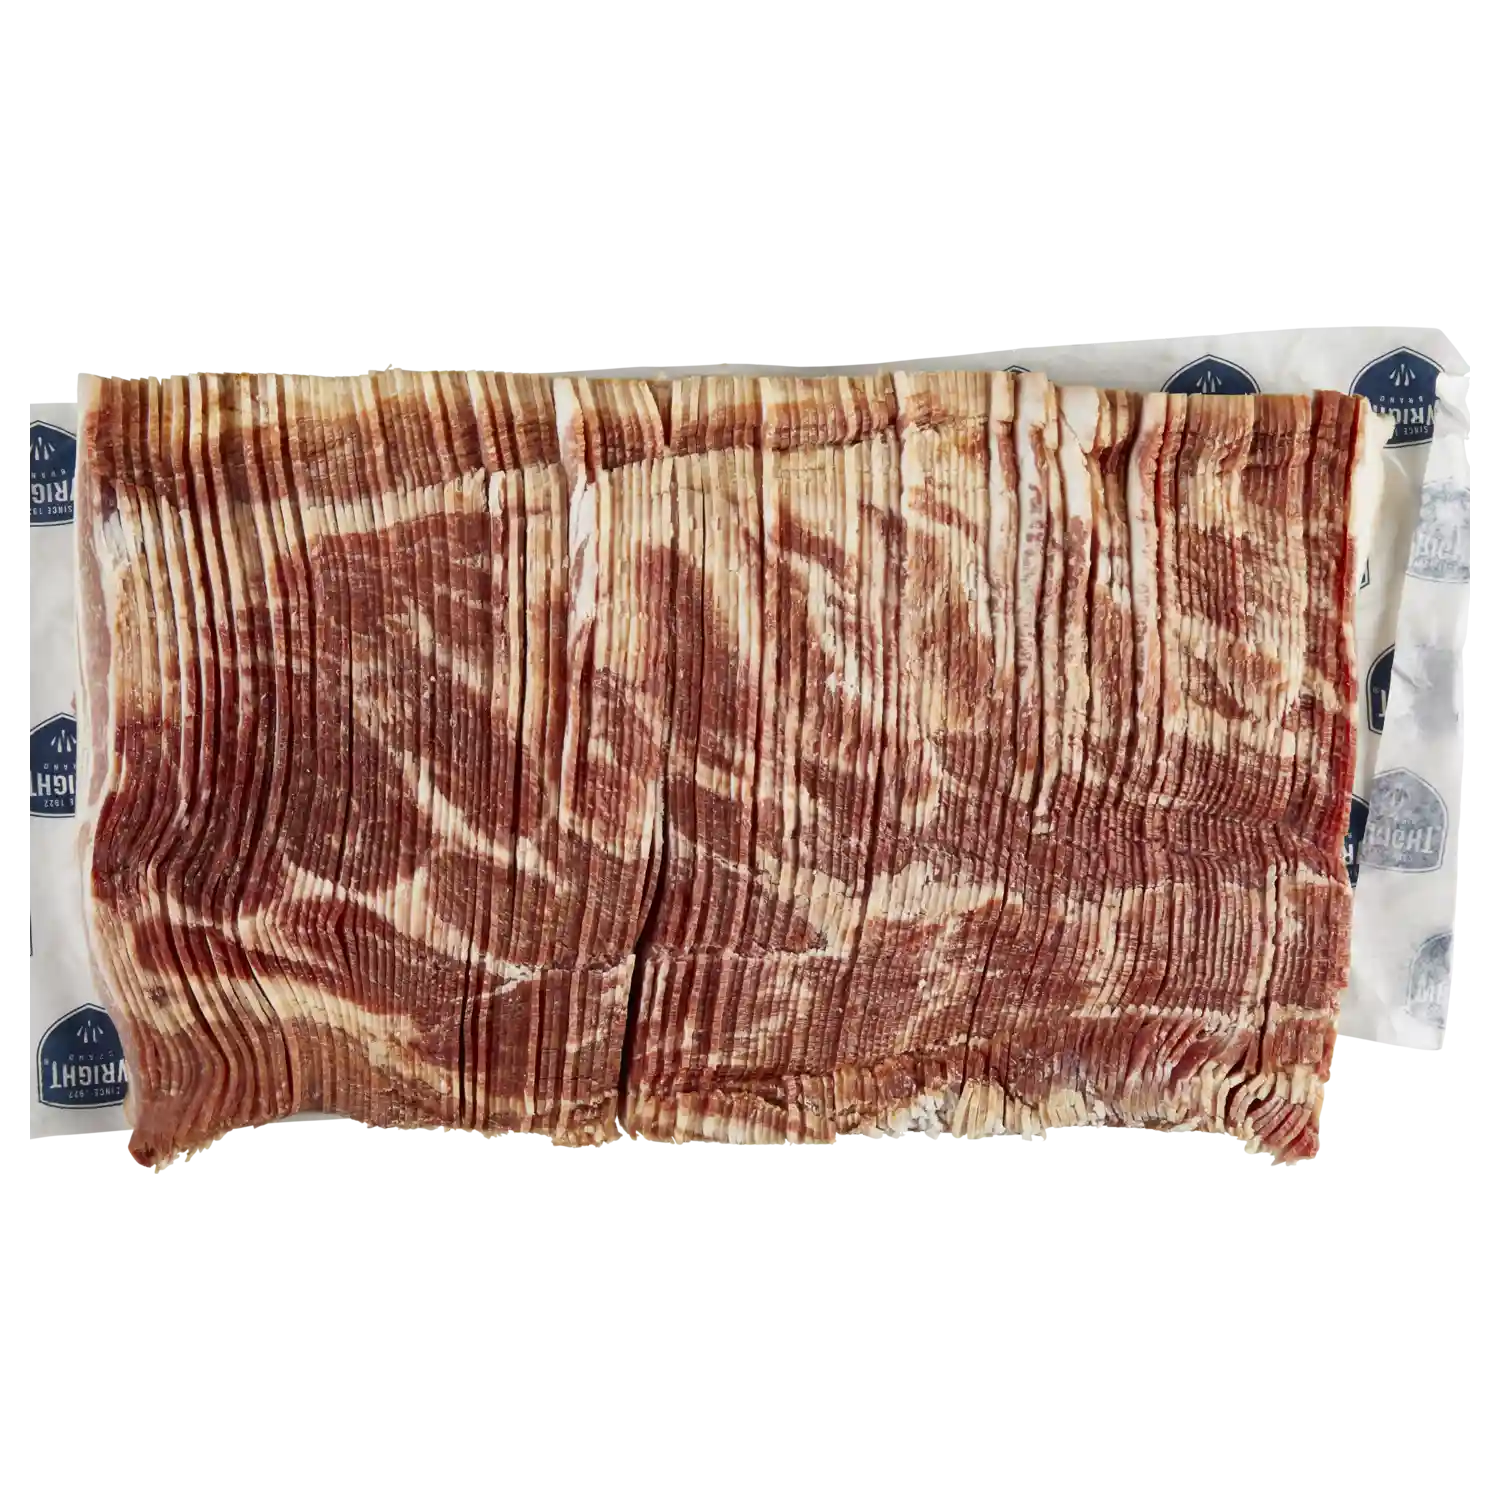 Wright® Brand Naturally Hickory Smoked Extra Thick Sliced Bacon, Bulk, 15 Lbs, 8-10 Slices per Pound, Frozen_image_31